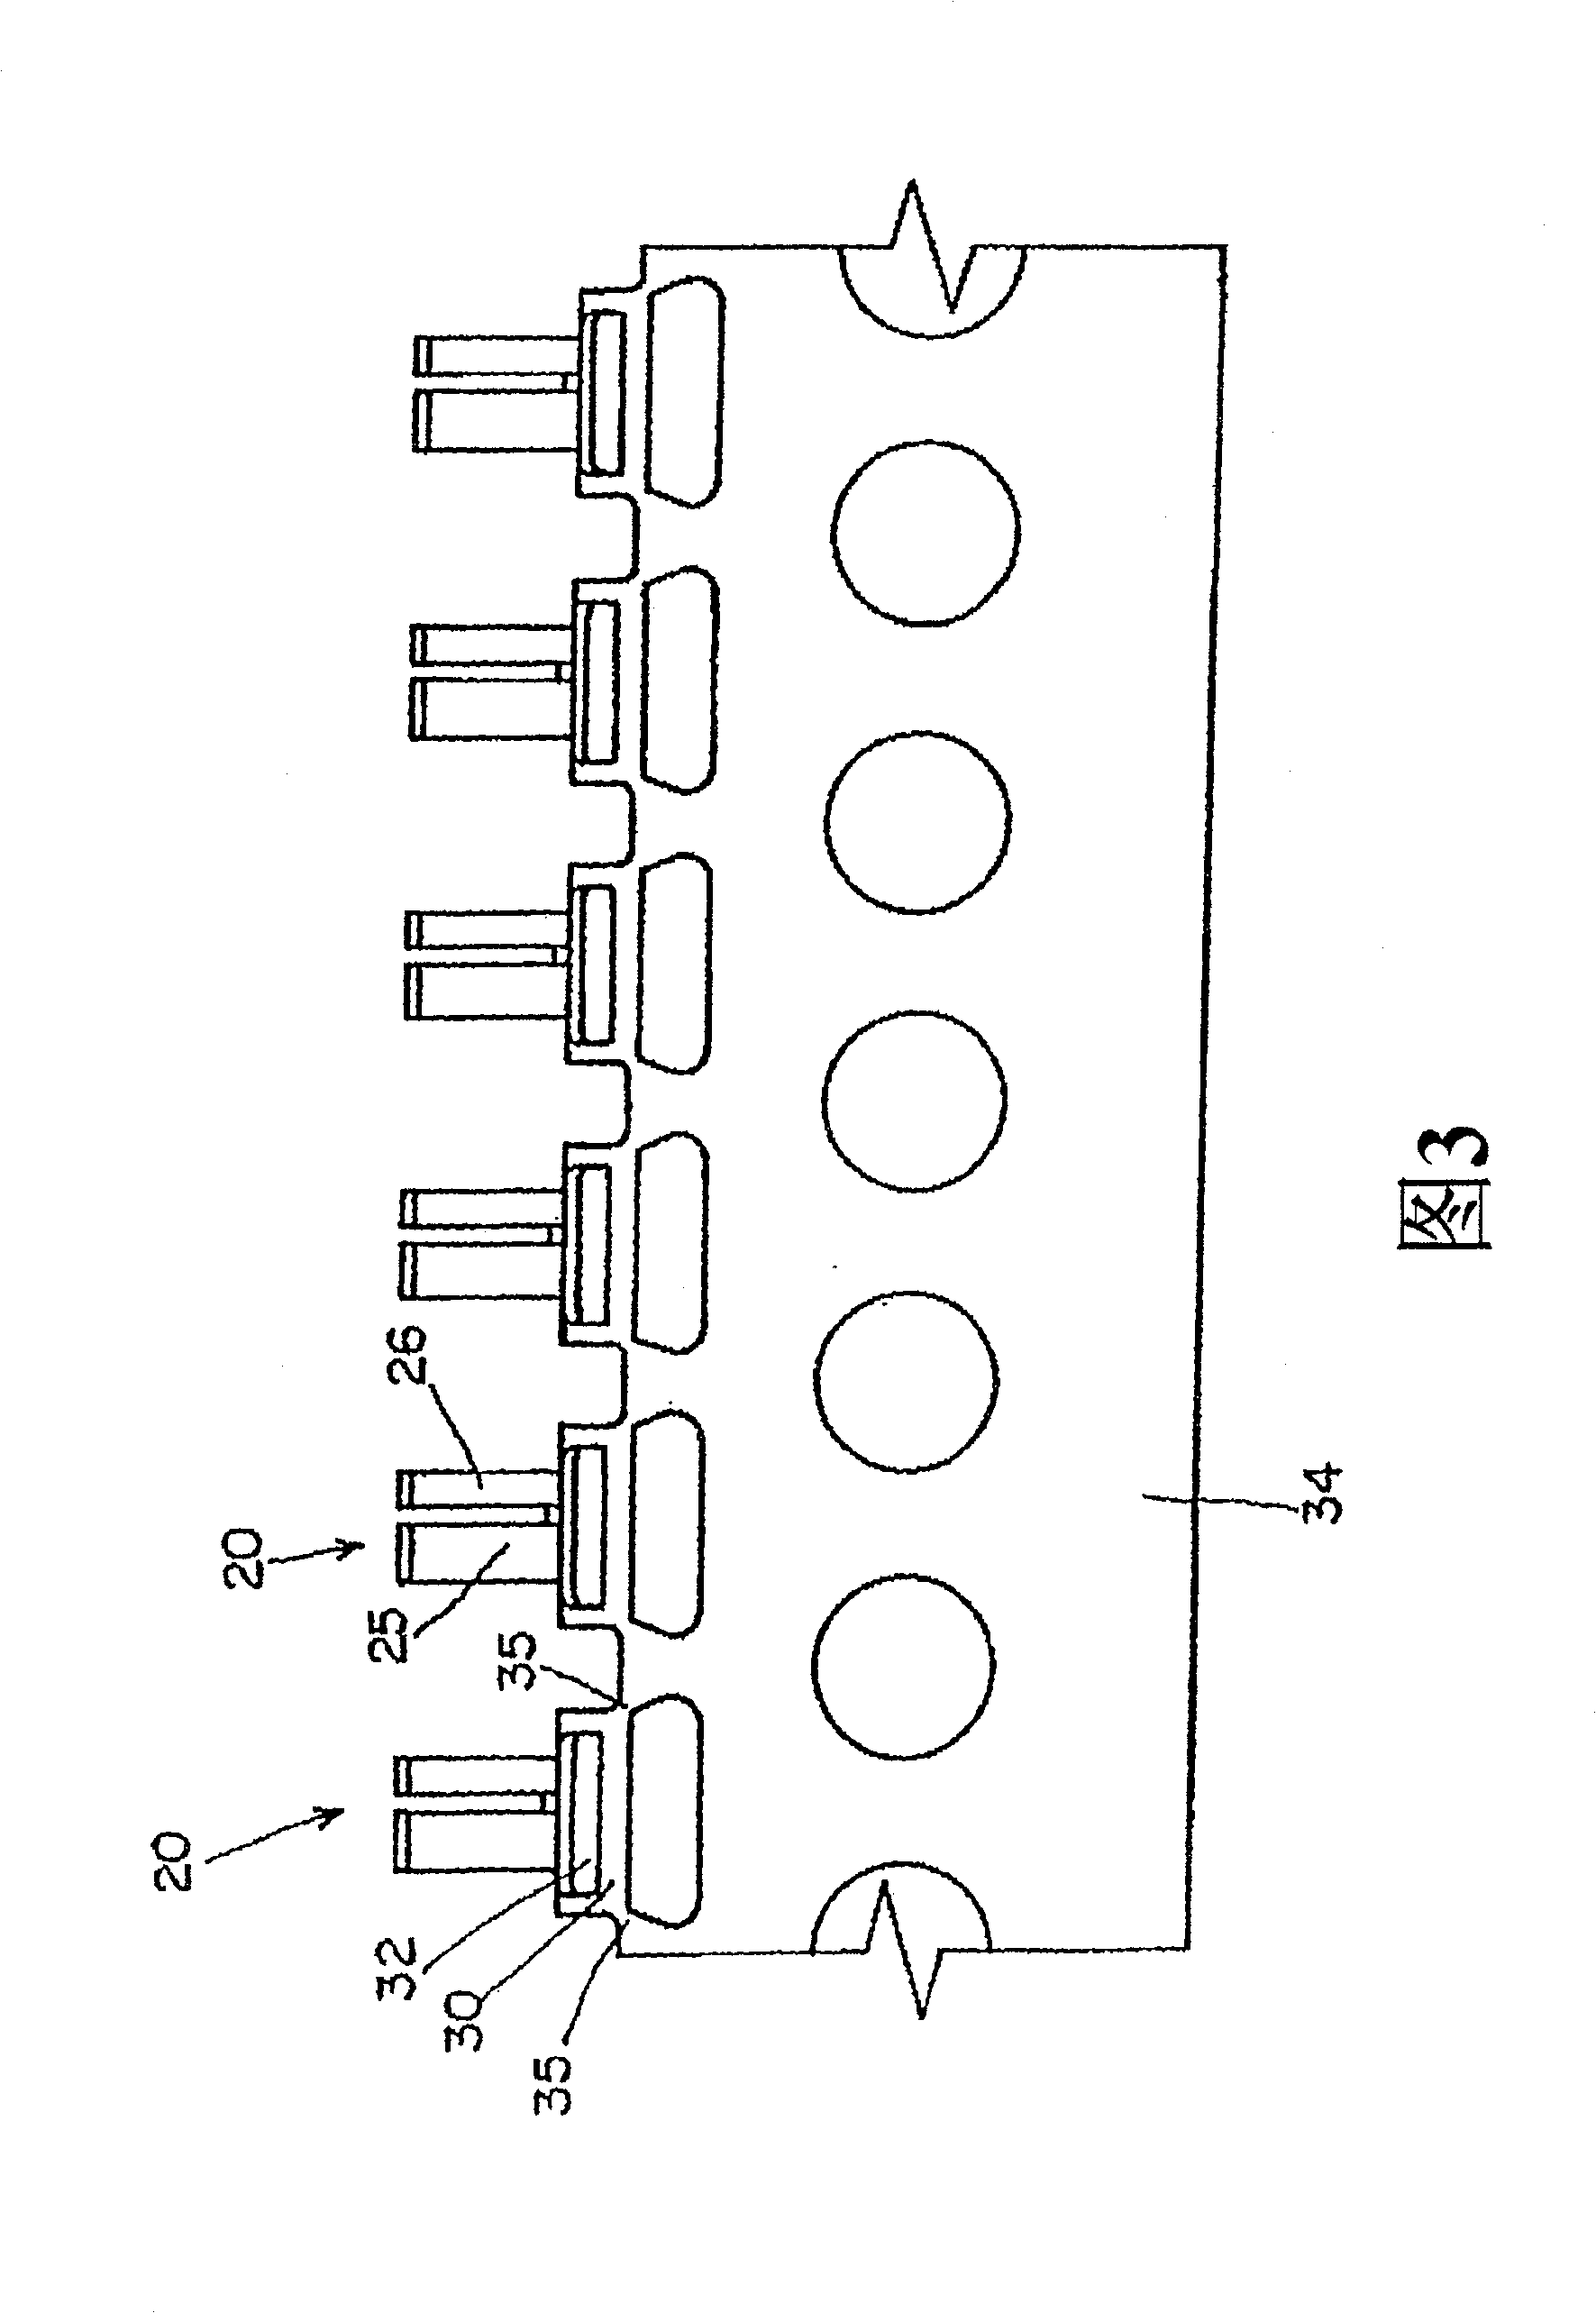 Electrical connector for printed circuit board